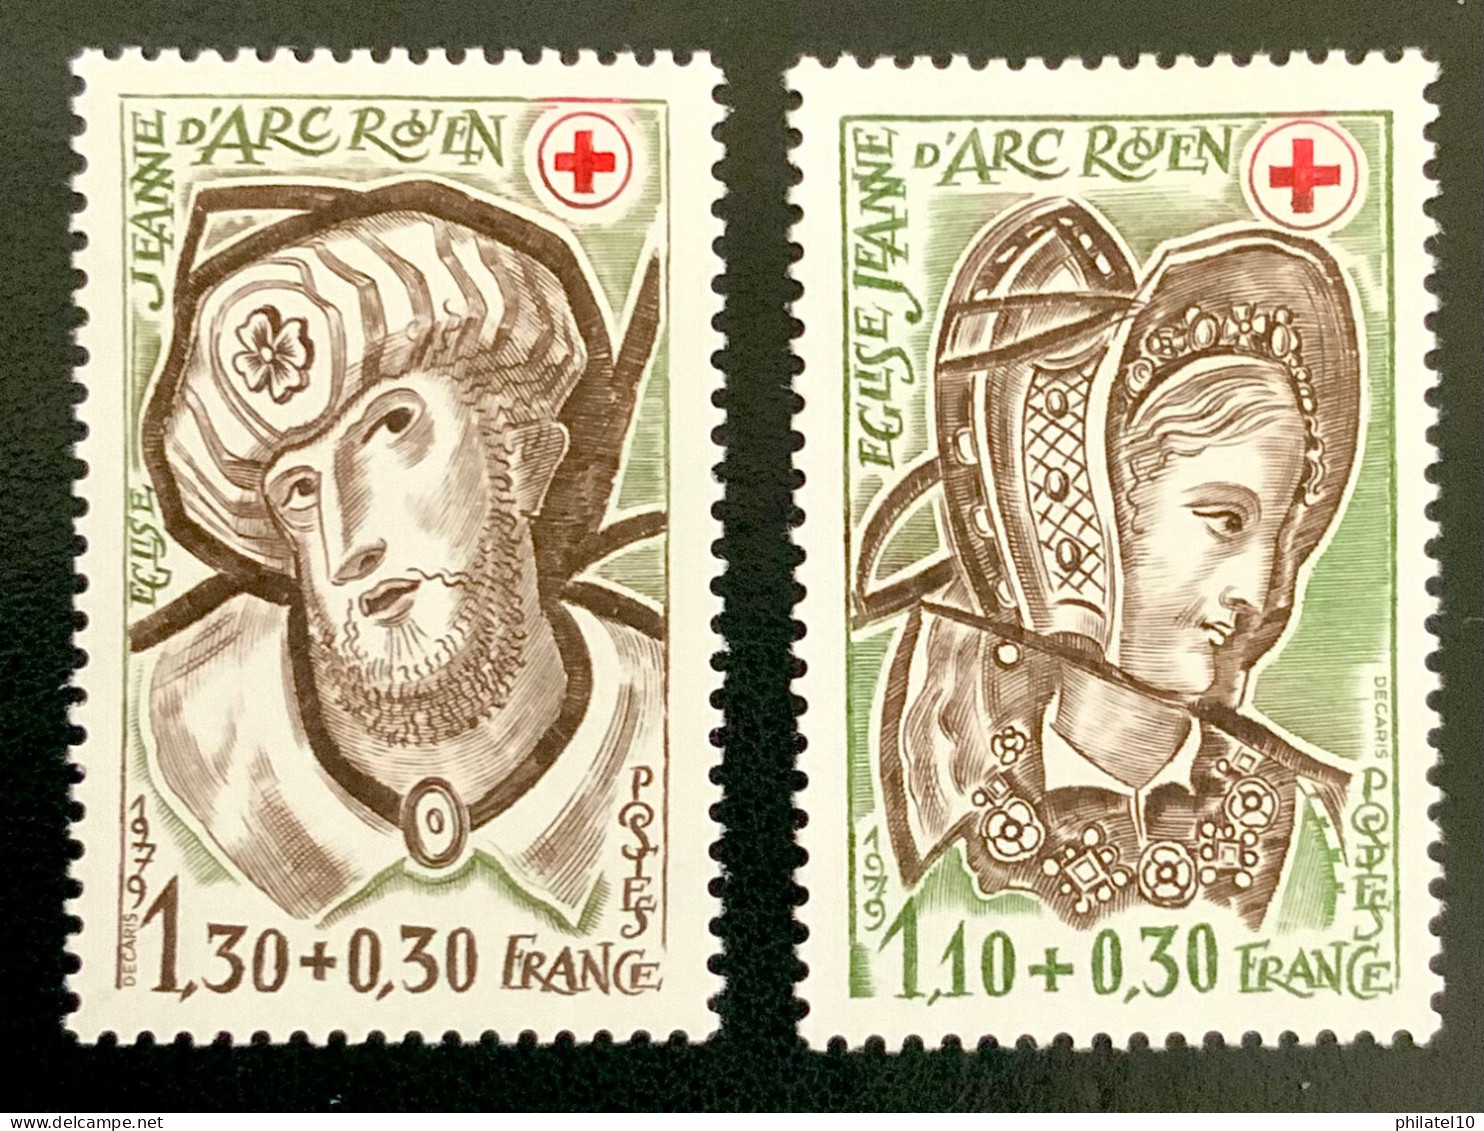 1979 FRANCE N 2071/72 CROIX ROUGE JEANNE D’ARC ROUEN - NEUF** - Unused Stamps